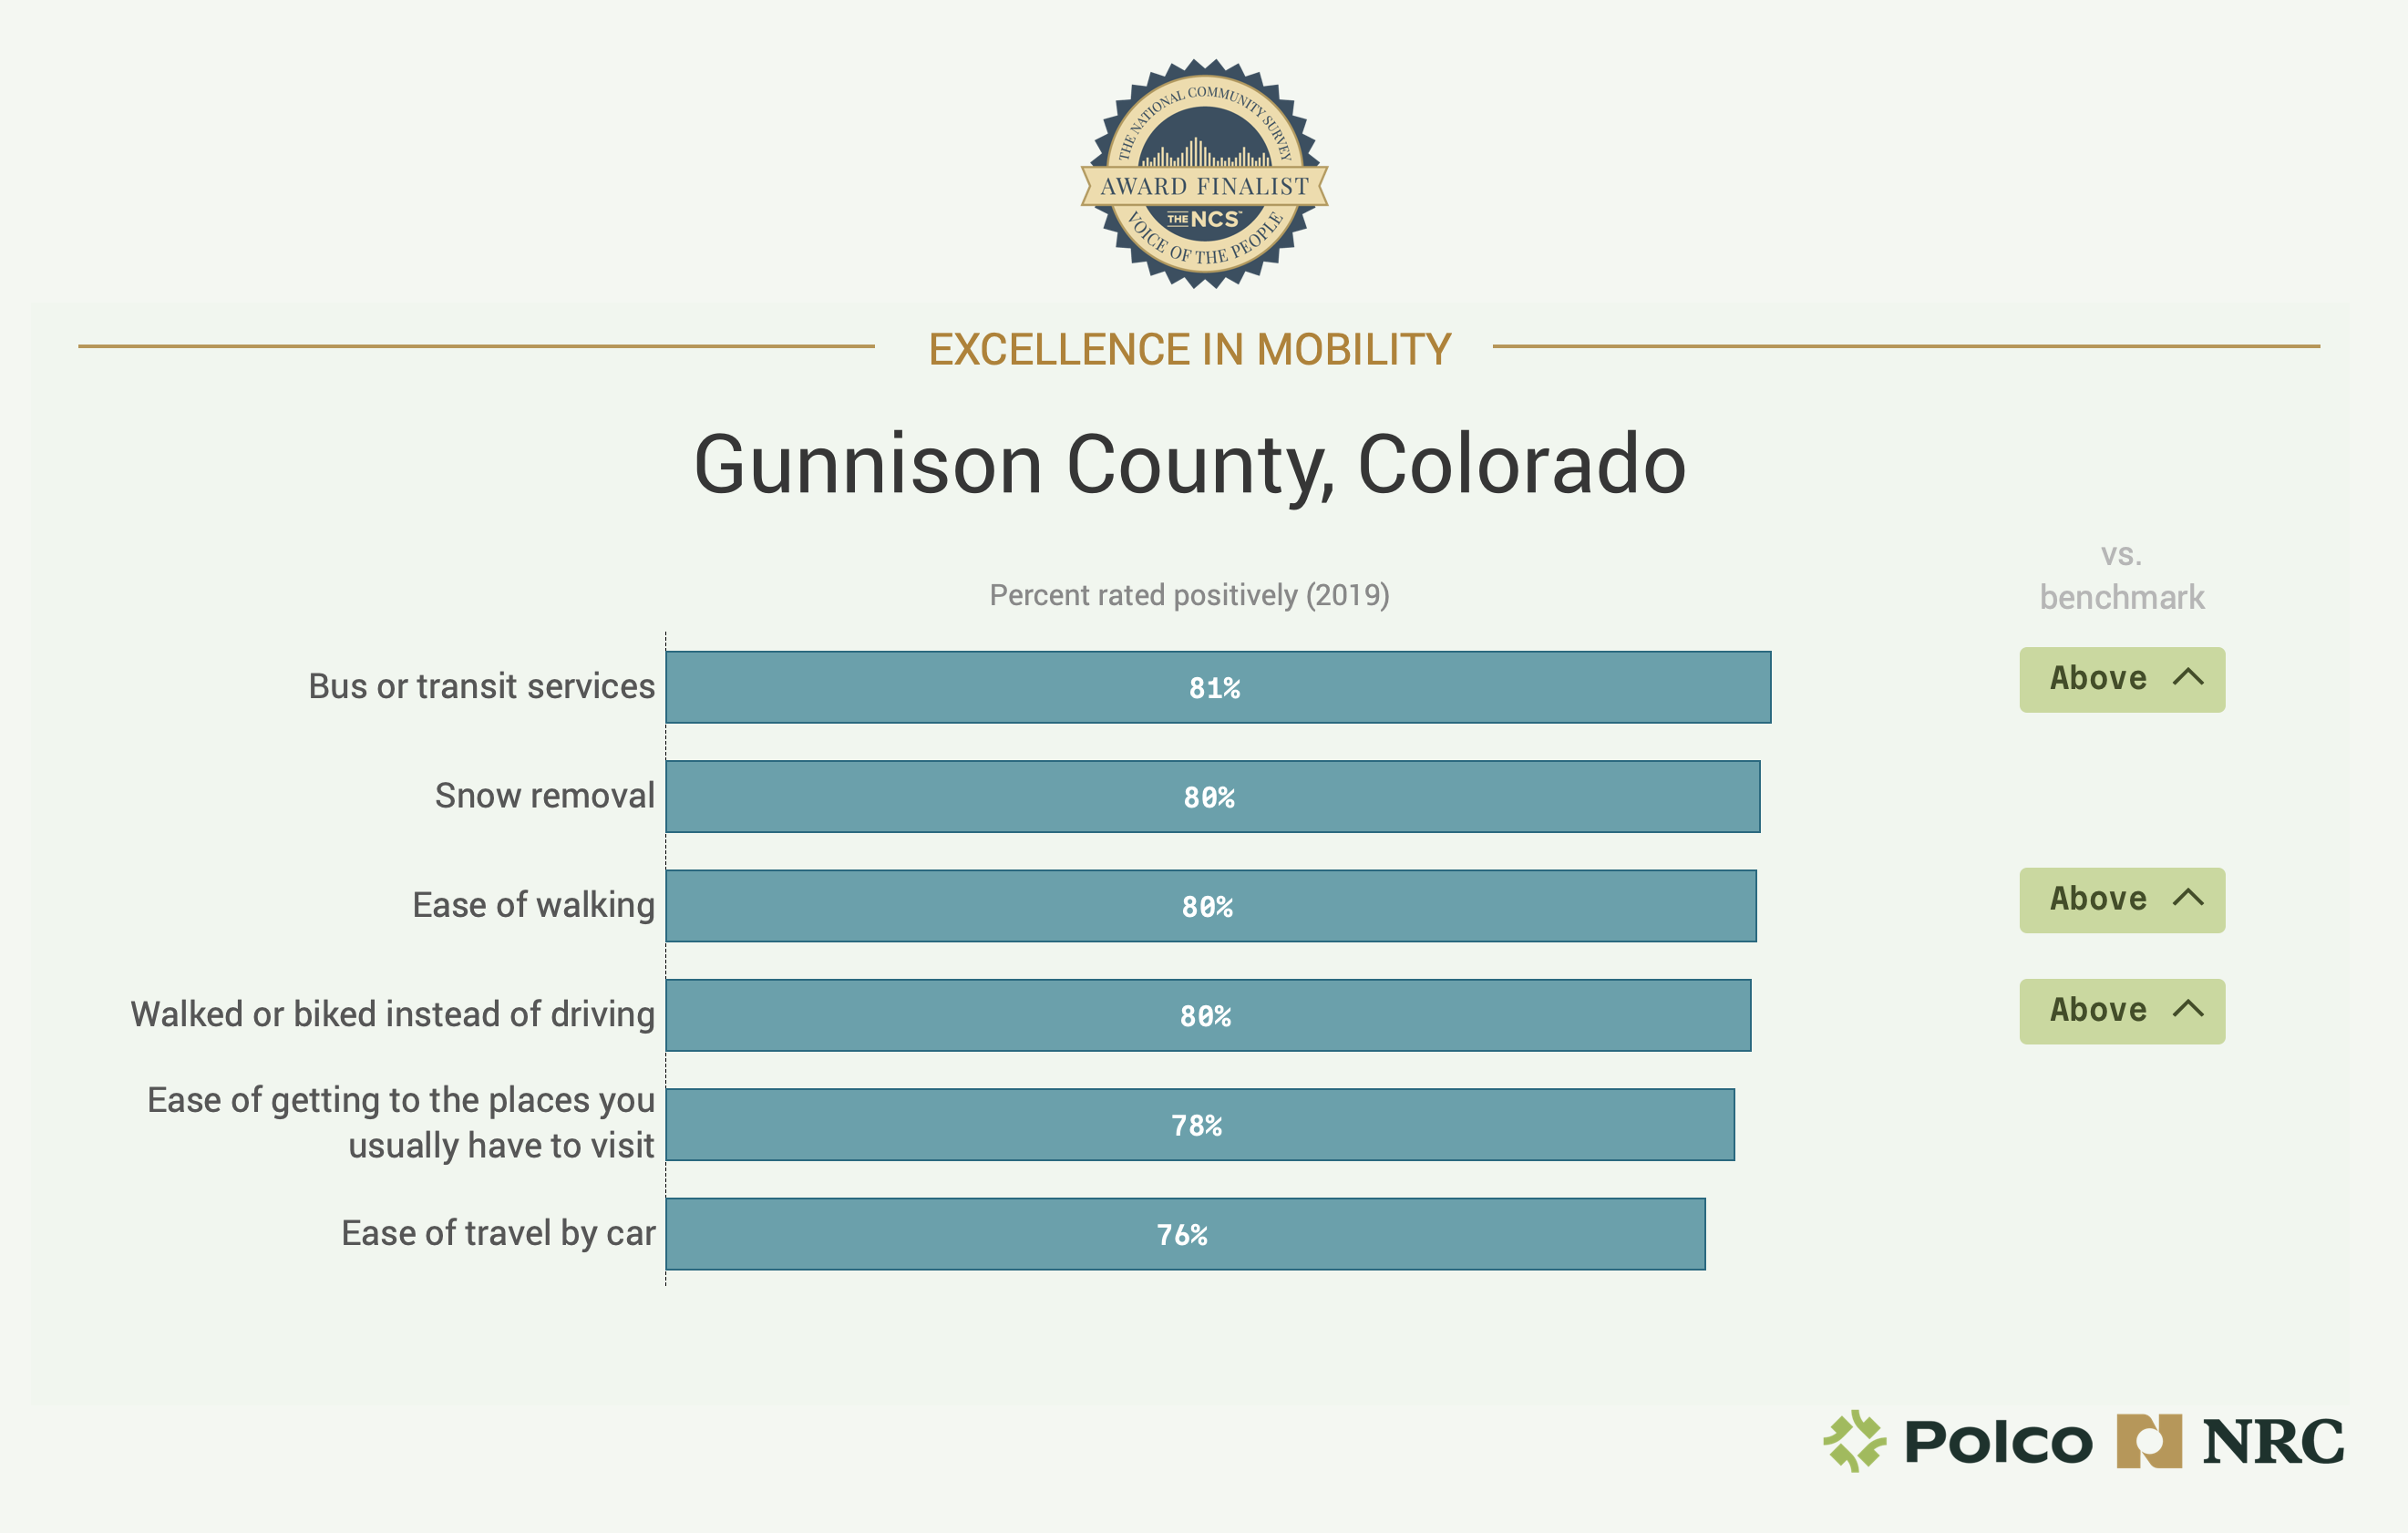 Chart showing Gunnison County's Excellence in Mobility